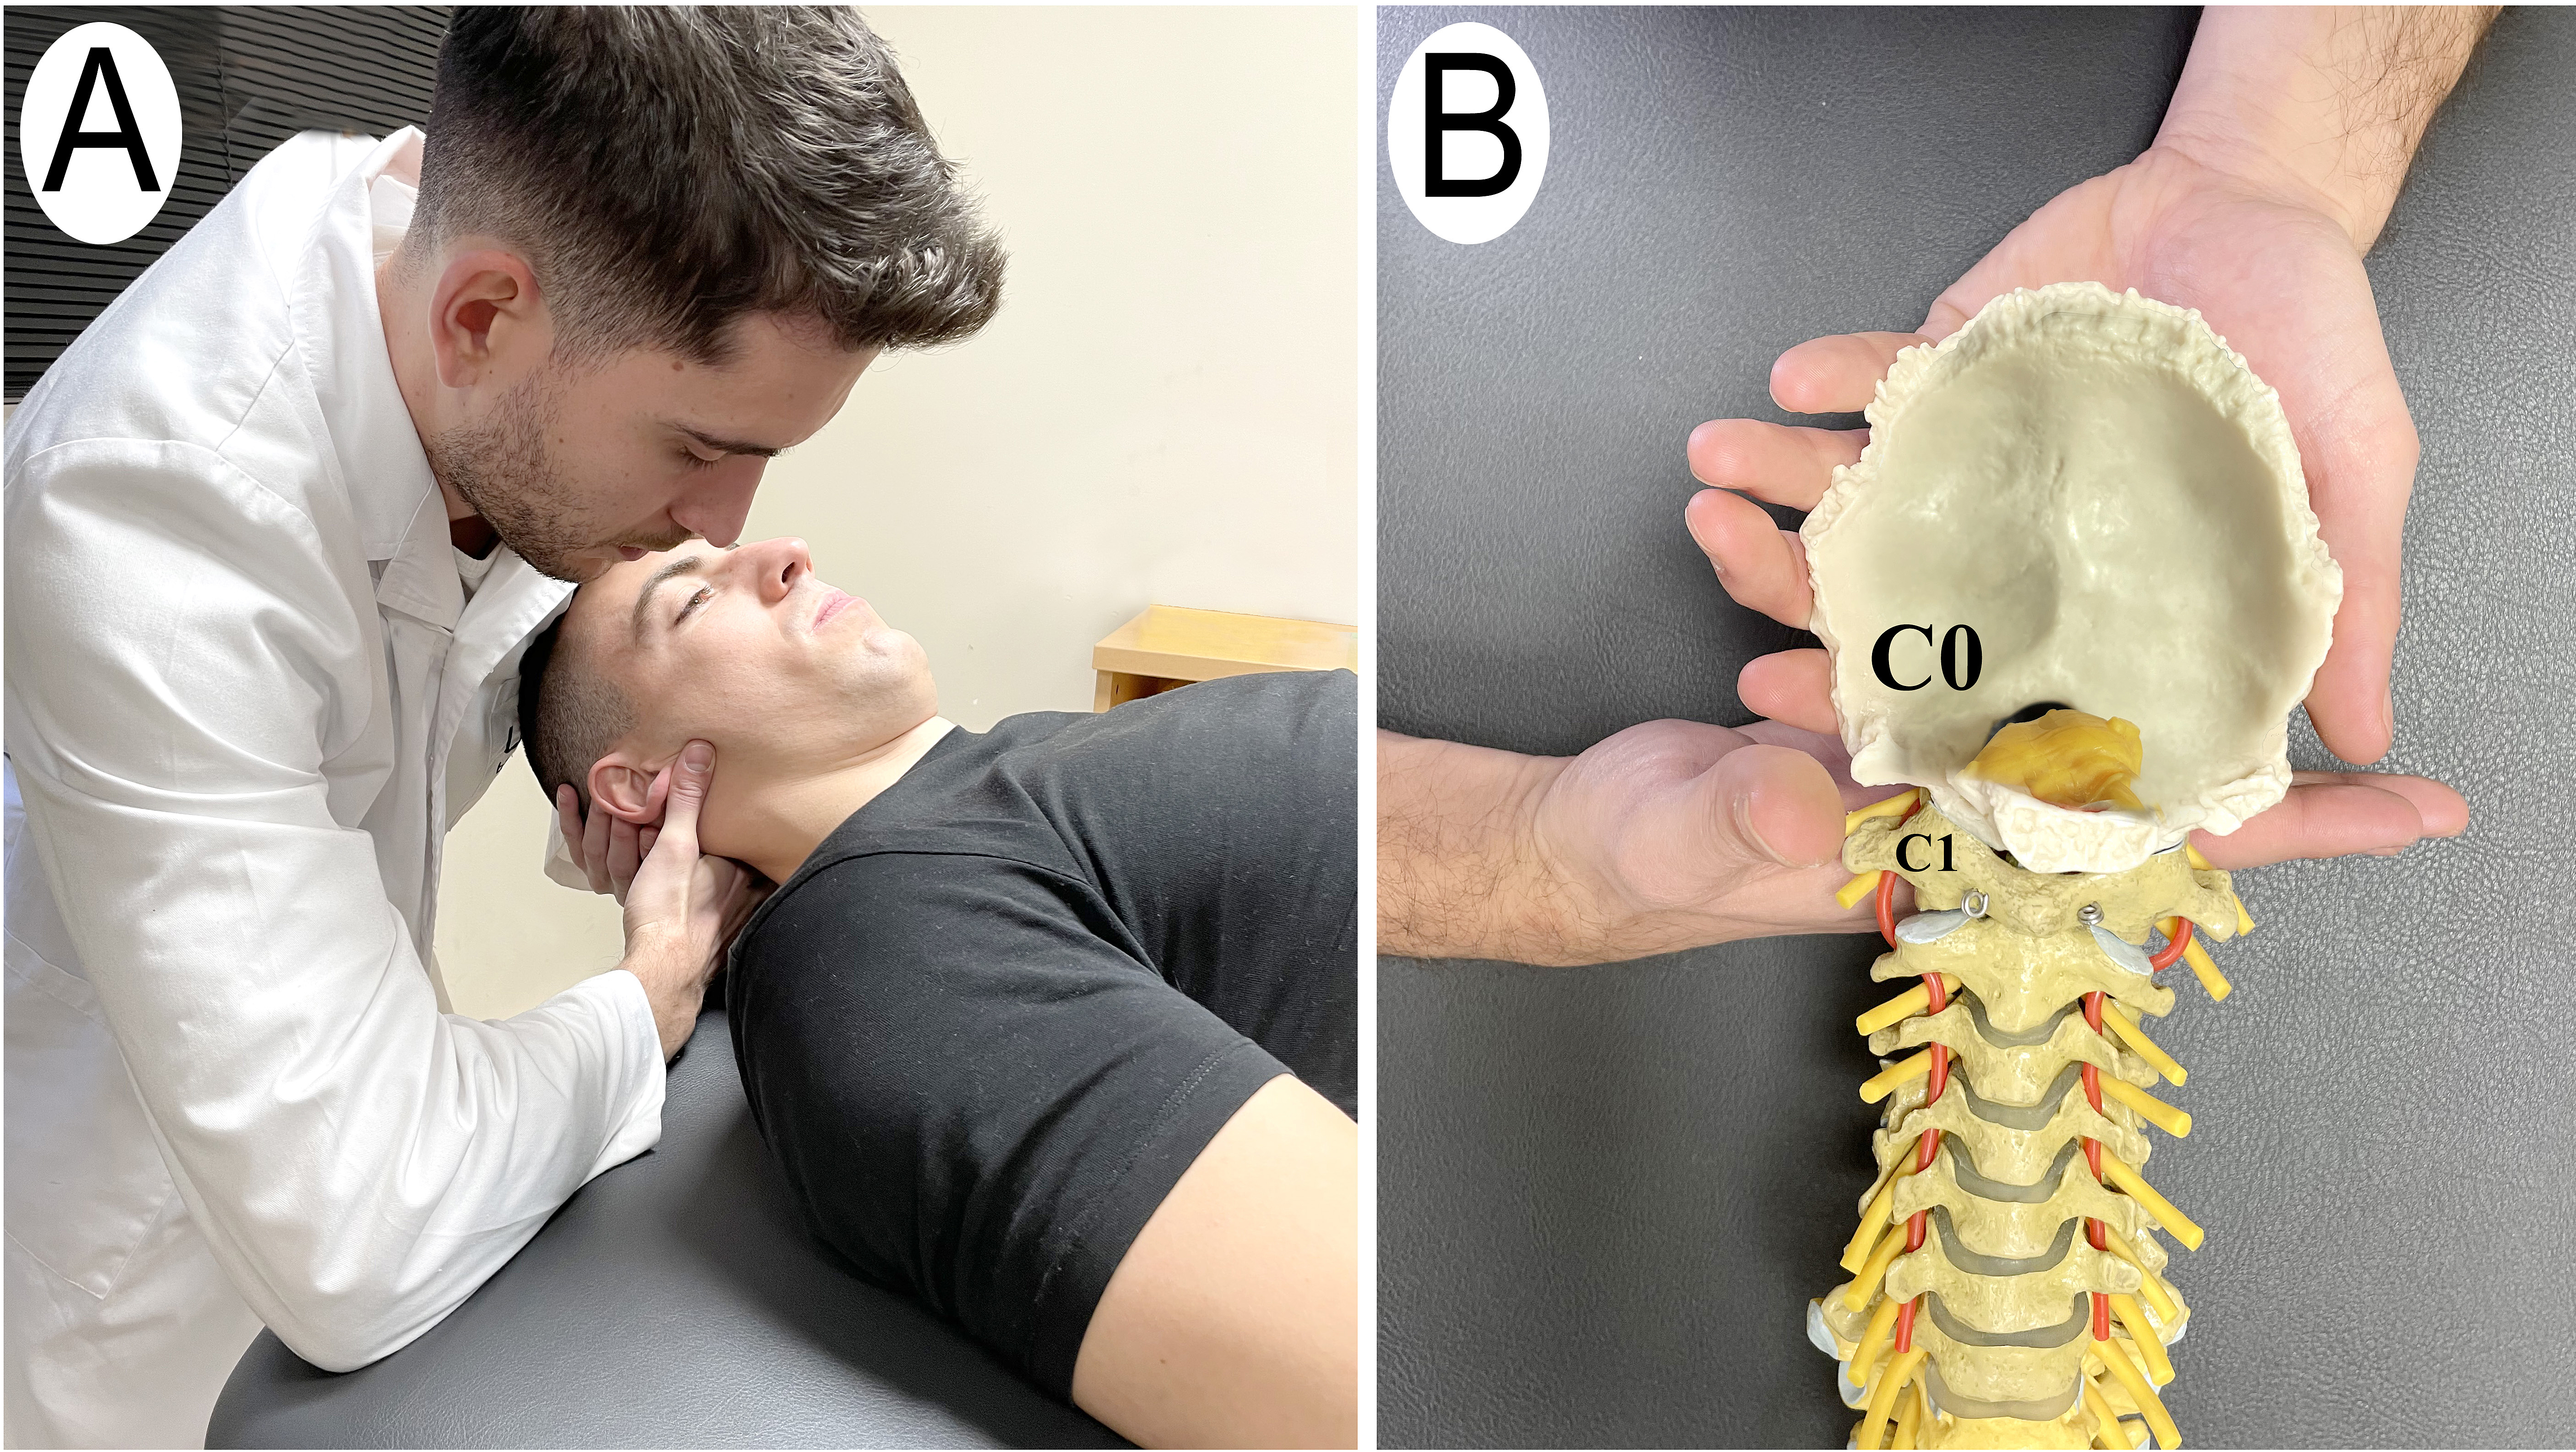 Manual therapy C0-C1 group. A) C0-C1 dorsal gliding manual therapy technique. B) Model technique.